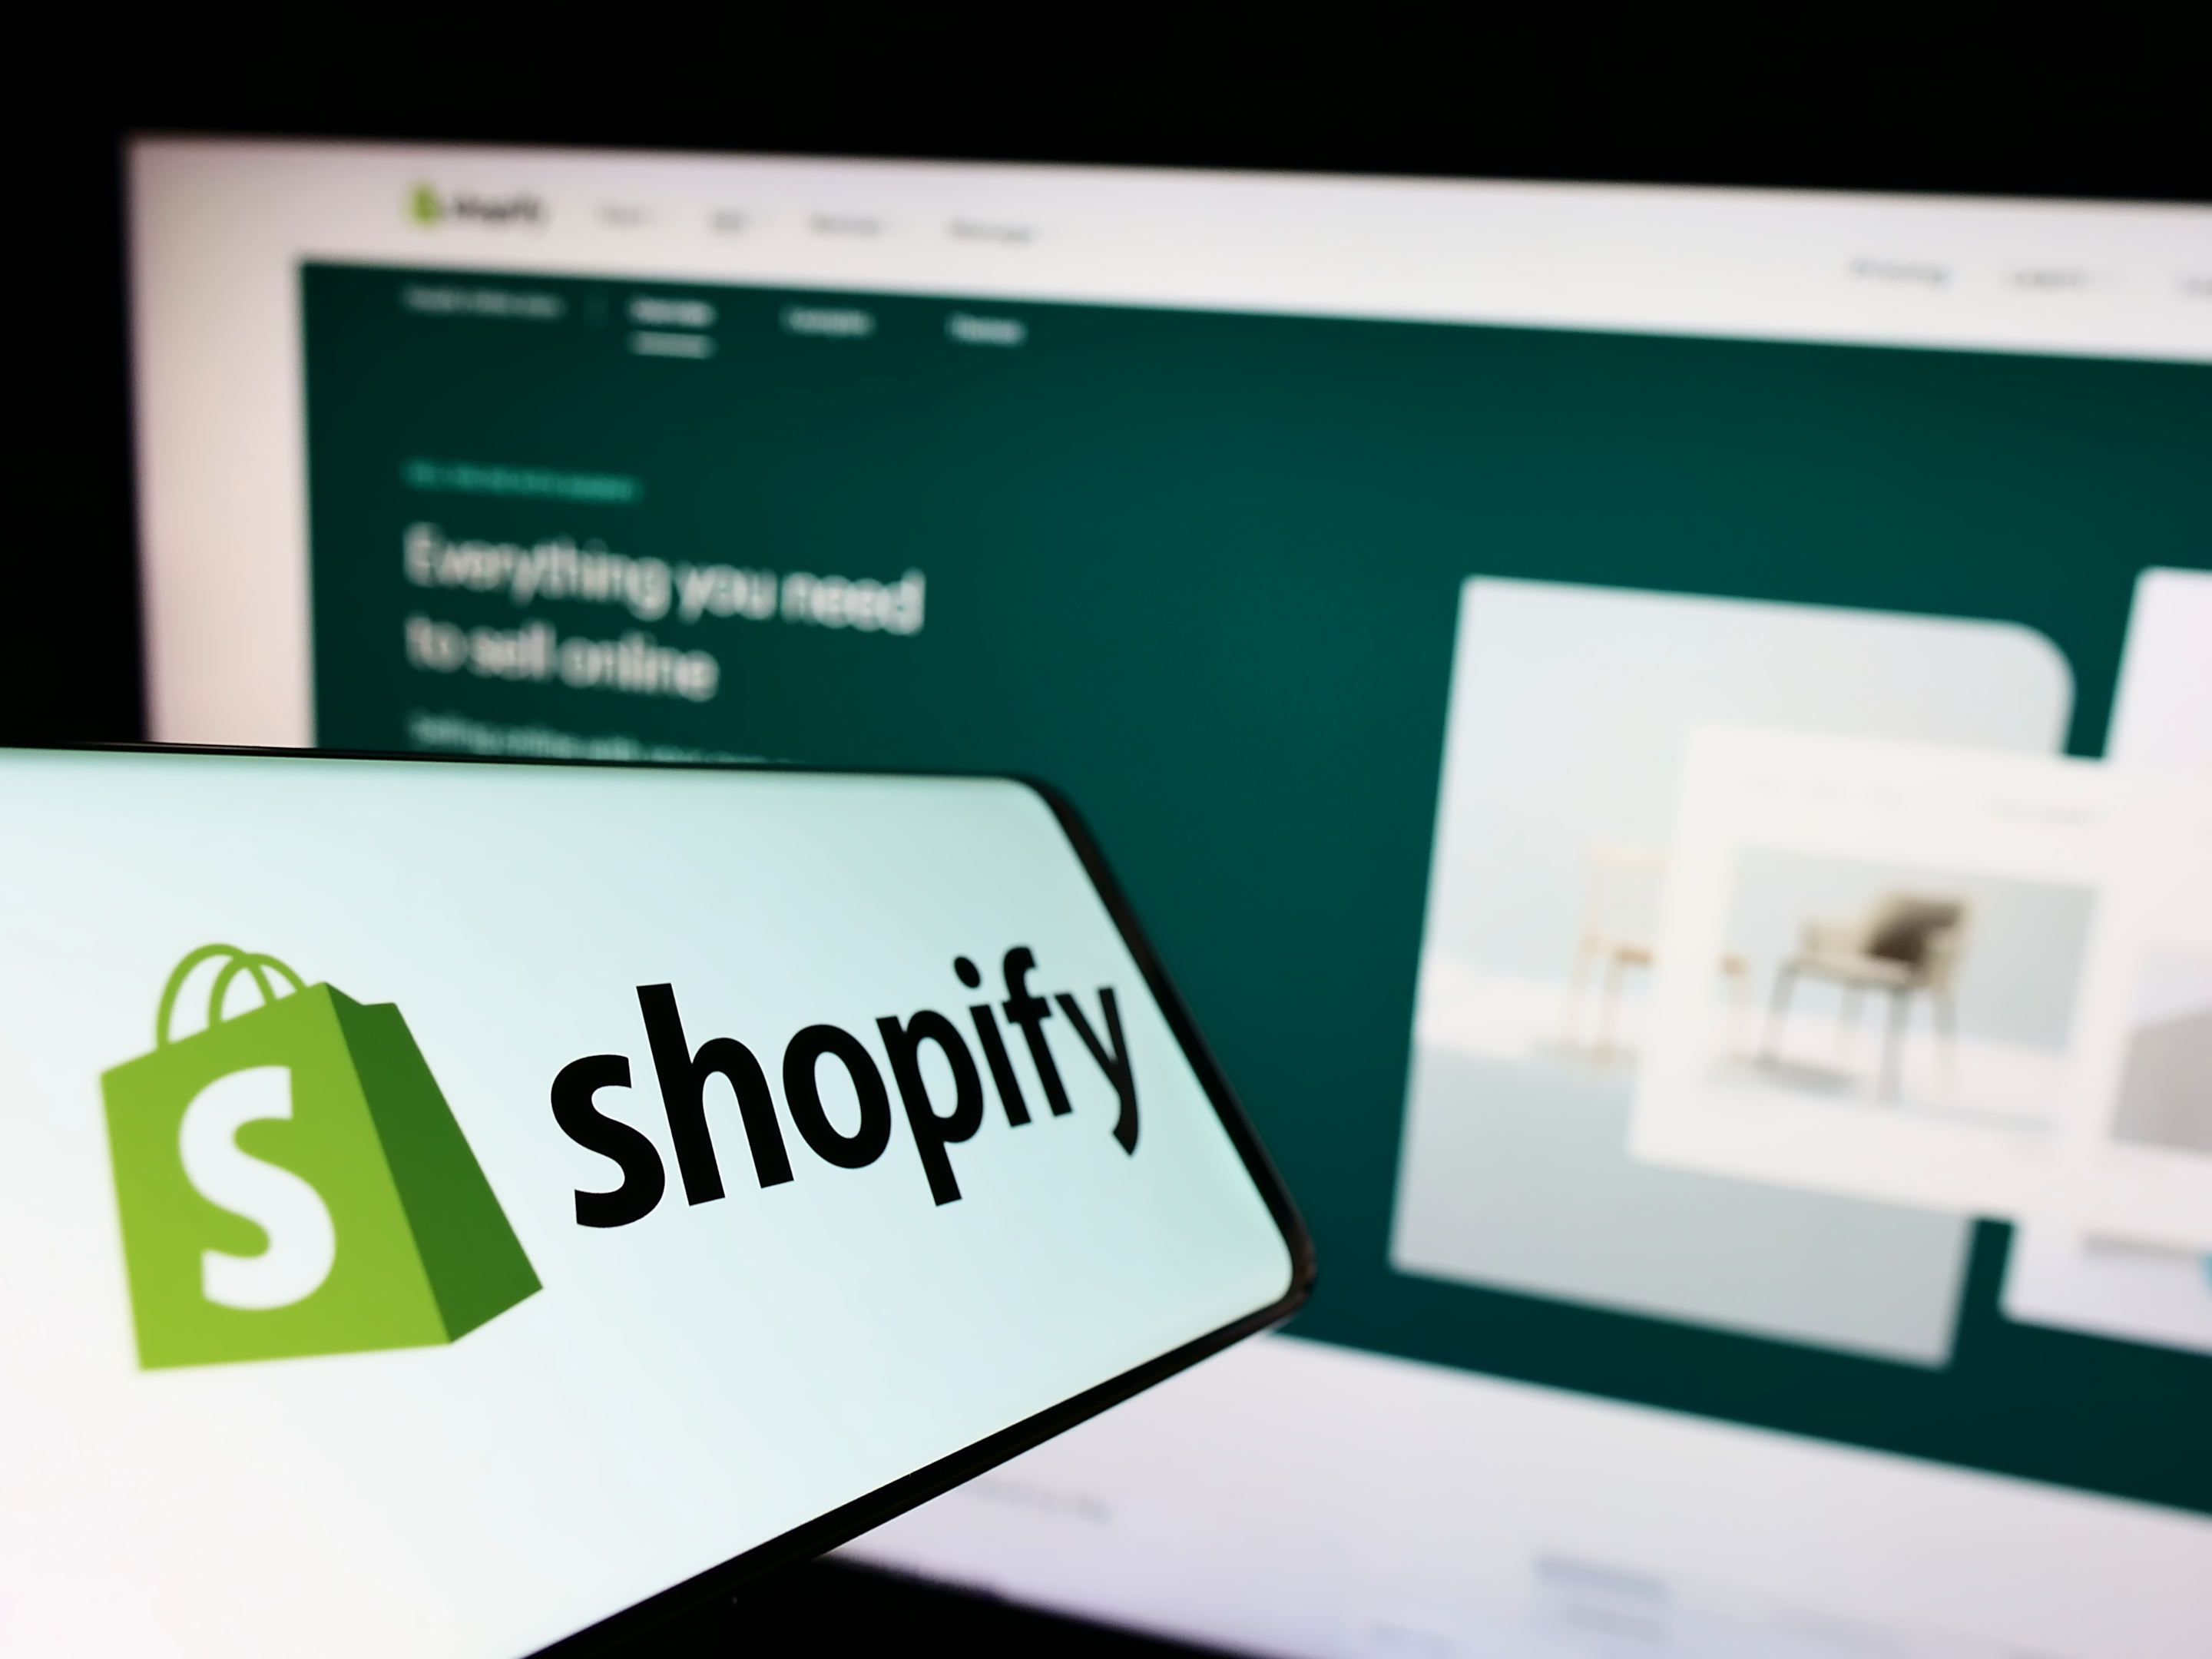 Shopify Seo Expert What To Look For In A Shopify Seo Expert Before Hiring Them?